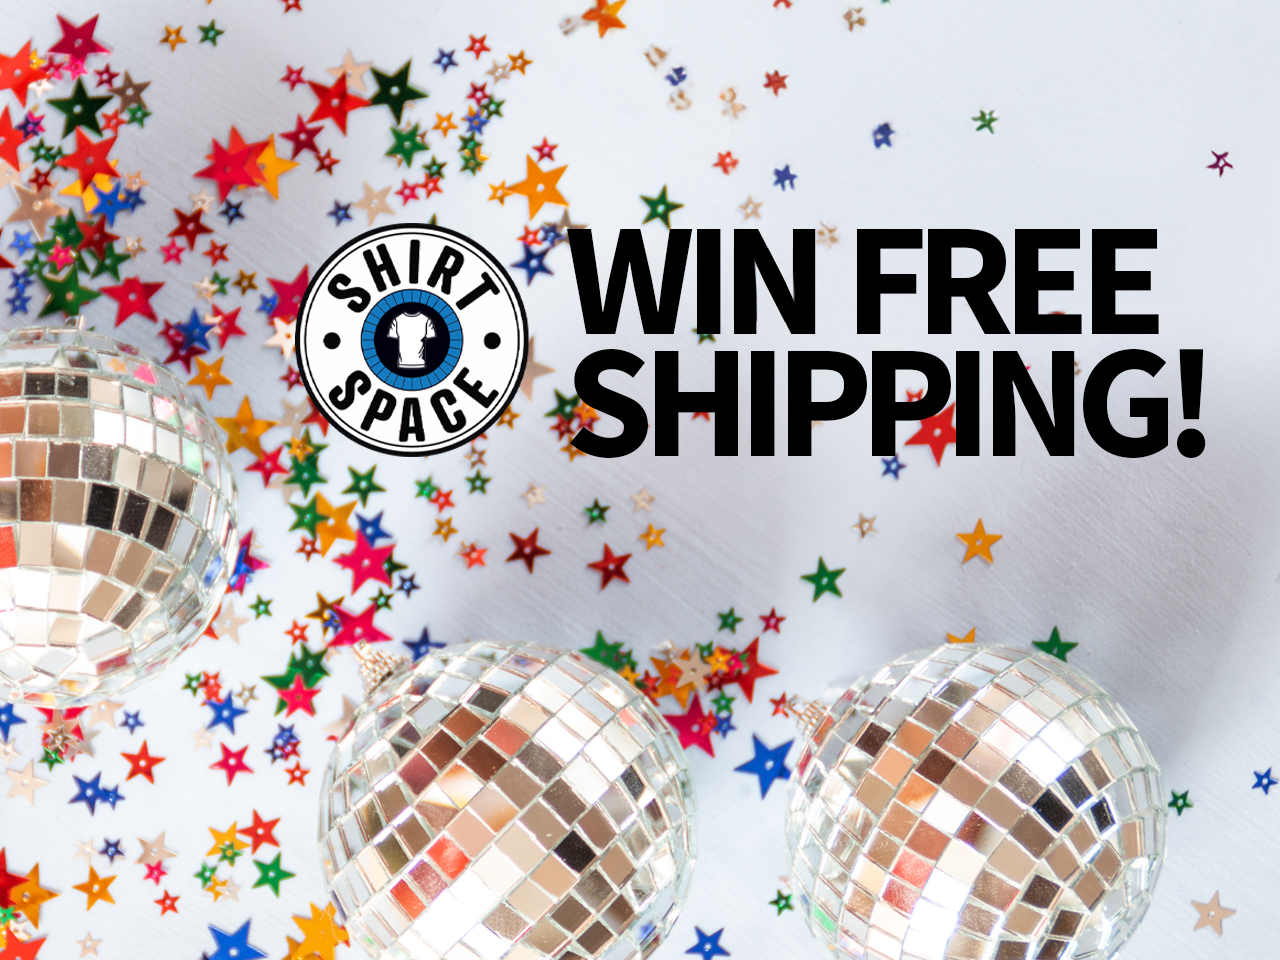 ShirtSpace Announces Its Biggest Giveaway in Company History: Free Shipping Sweepstakes